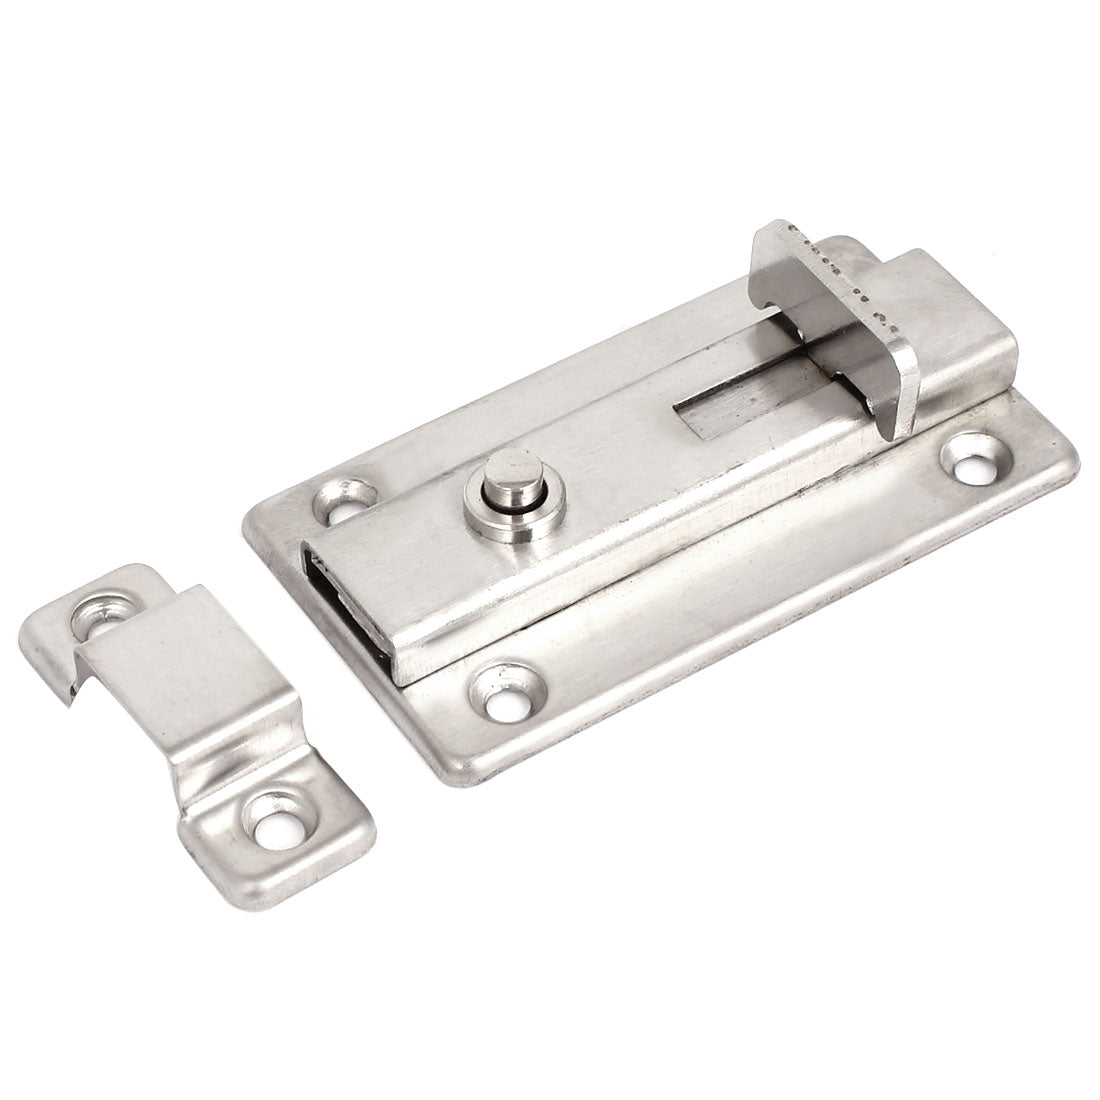 uxcell Uxcell Stainless Steel Gate Lock Safe Door Latch Hasp Spring Bolt 3.6" Long